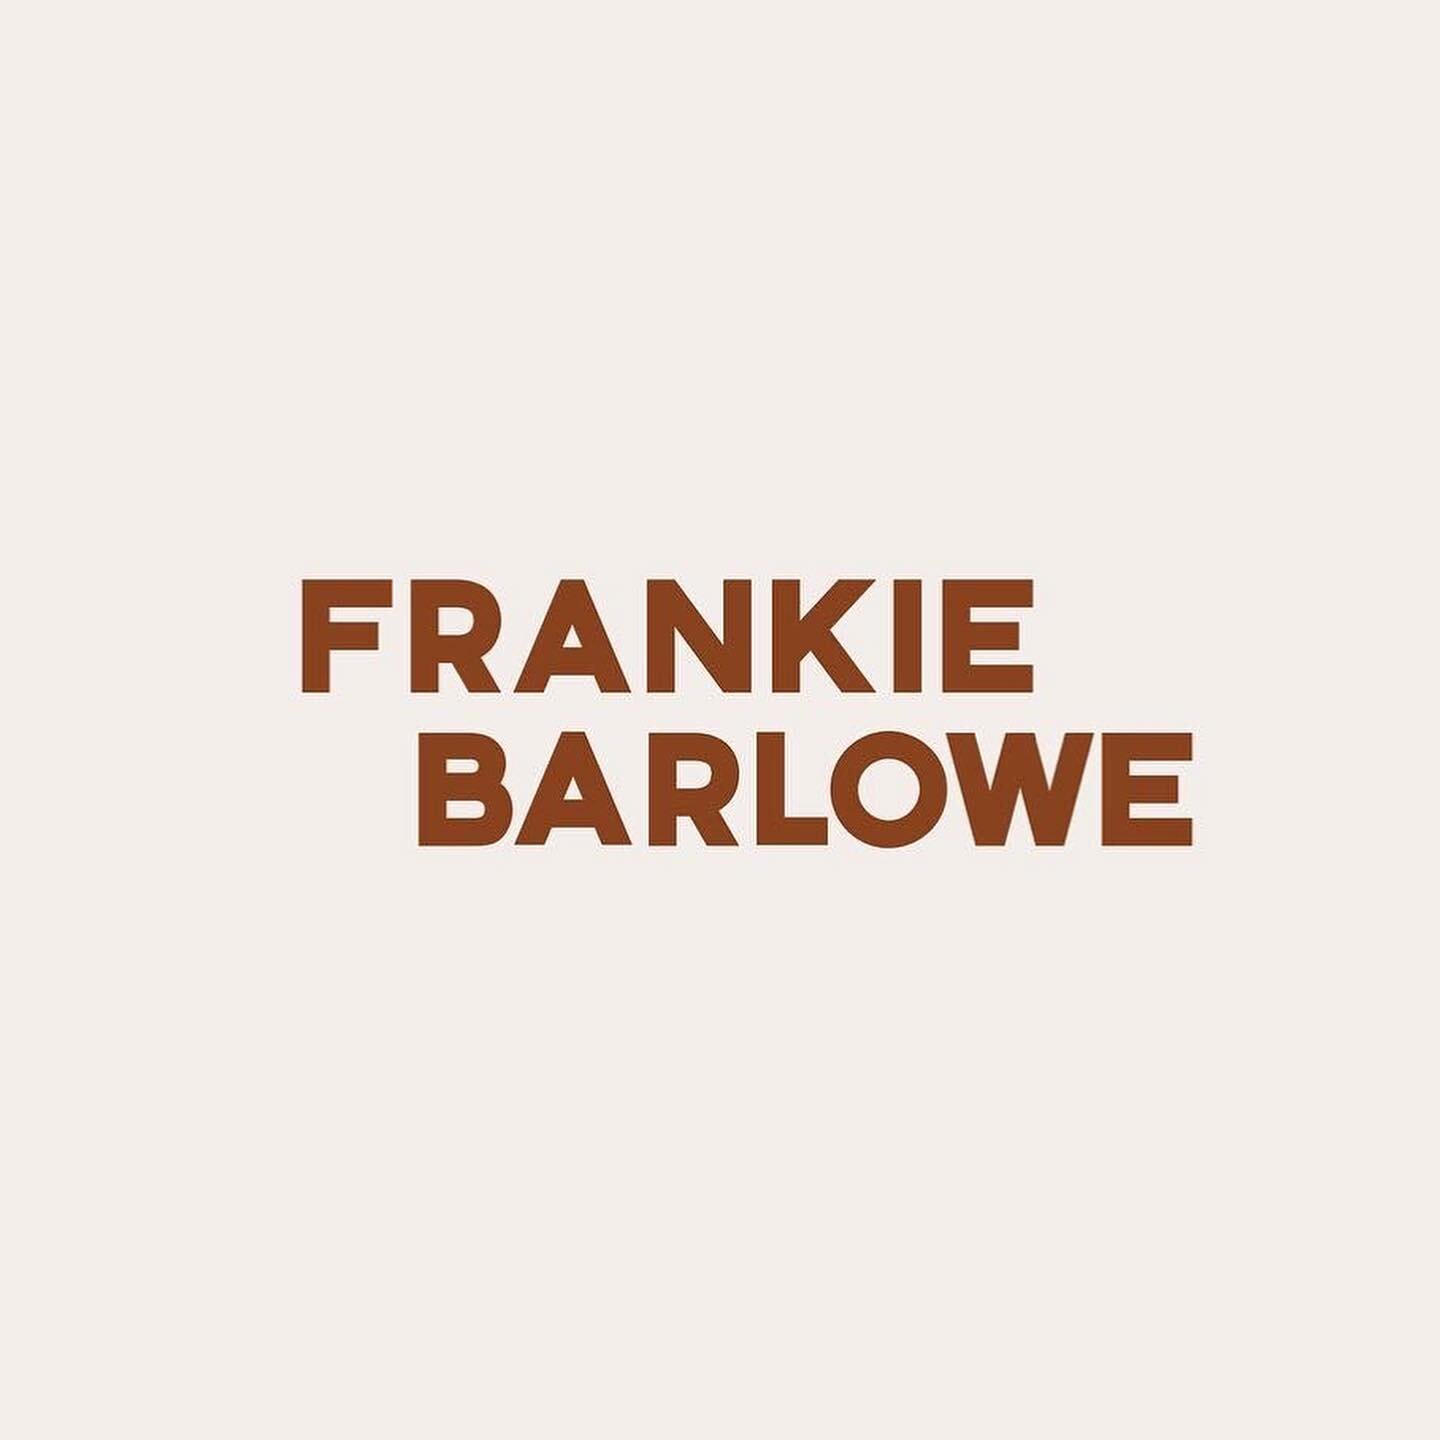 Frankie Barlowe studio ✨🧘🏻&zwj;♀️

I am back in the office after a short vacation and I can&rsquo;t wait to show you the new things I am working on at the moment. 

Anything you want to see? 

#designchallenge #creativechallenge #brandidentity #cre